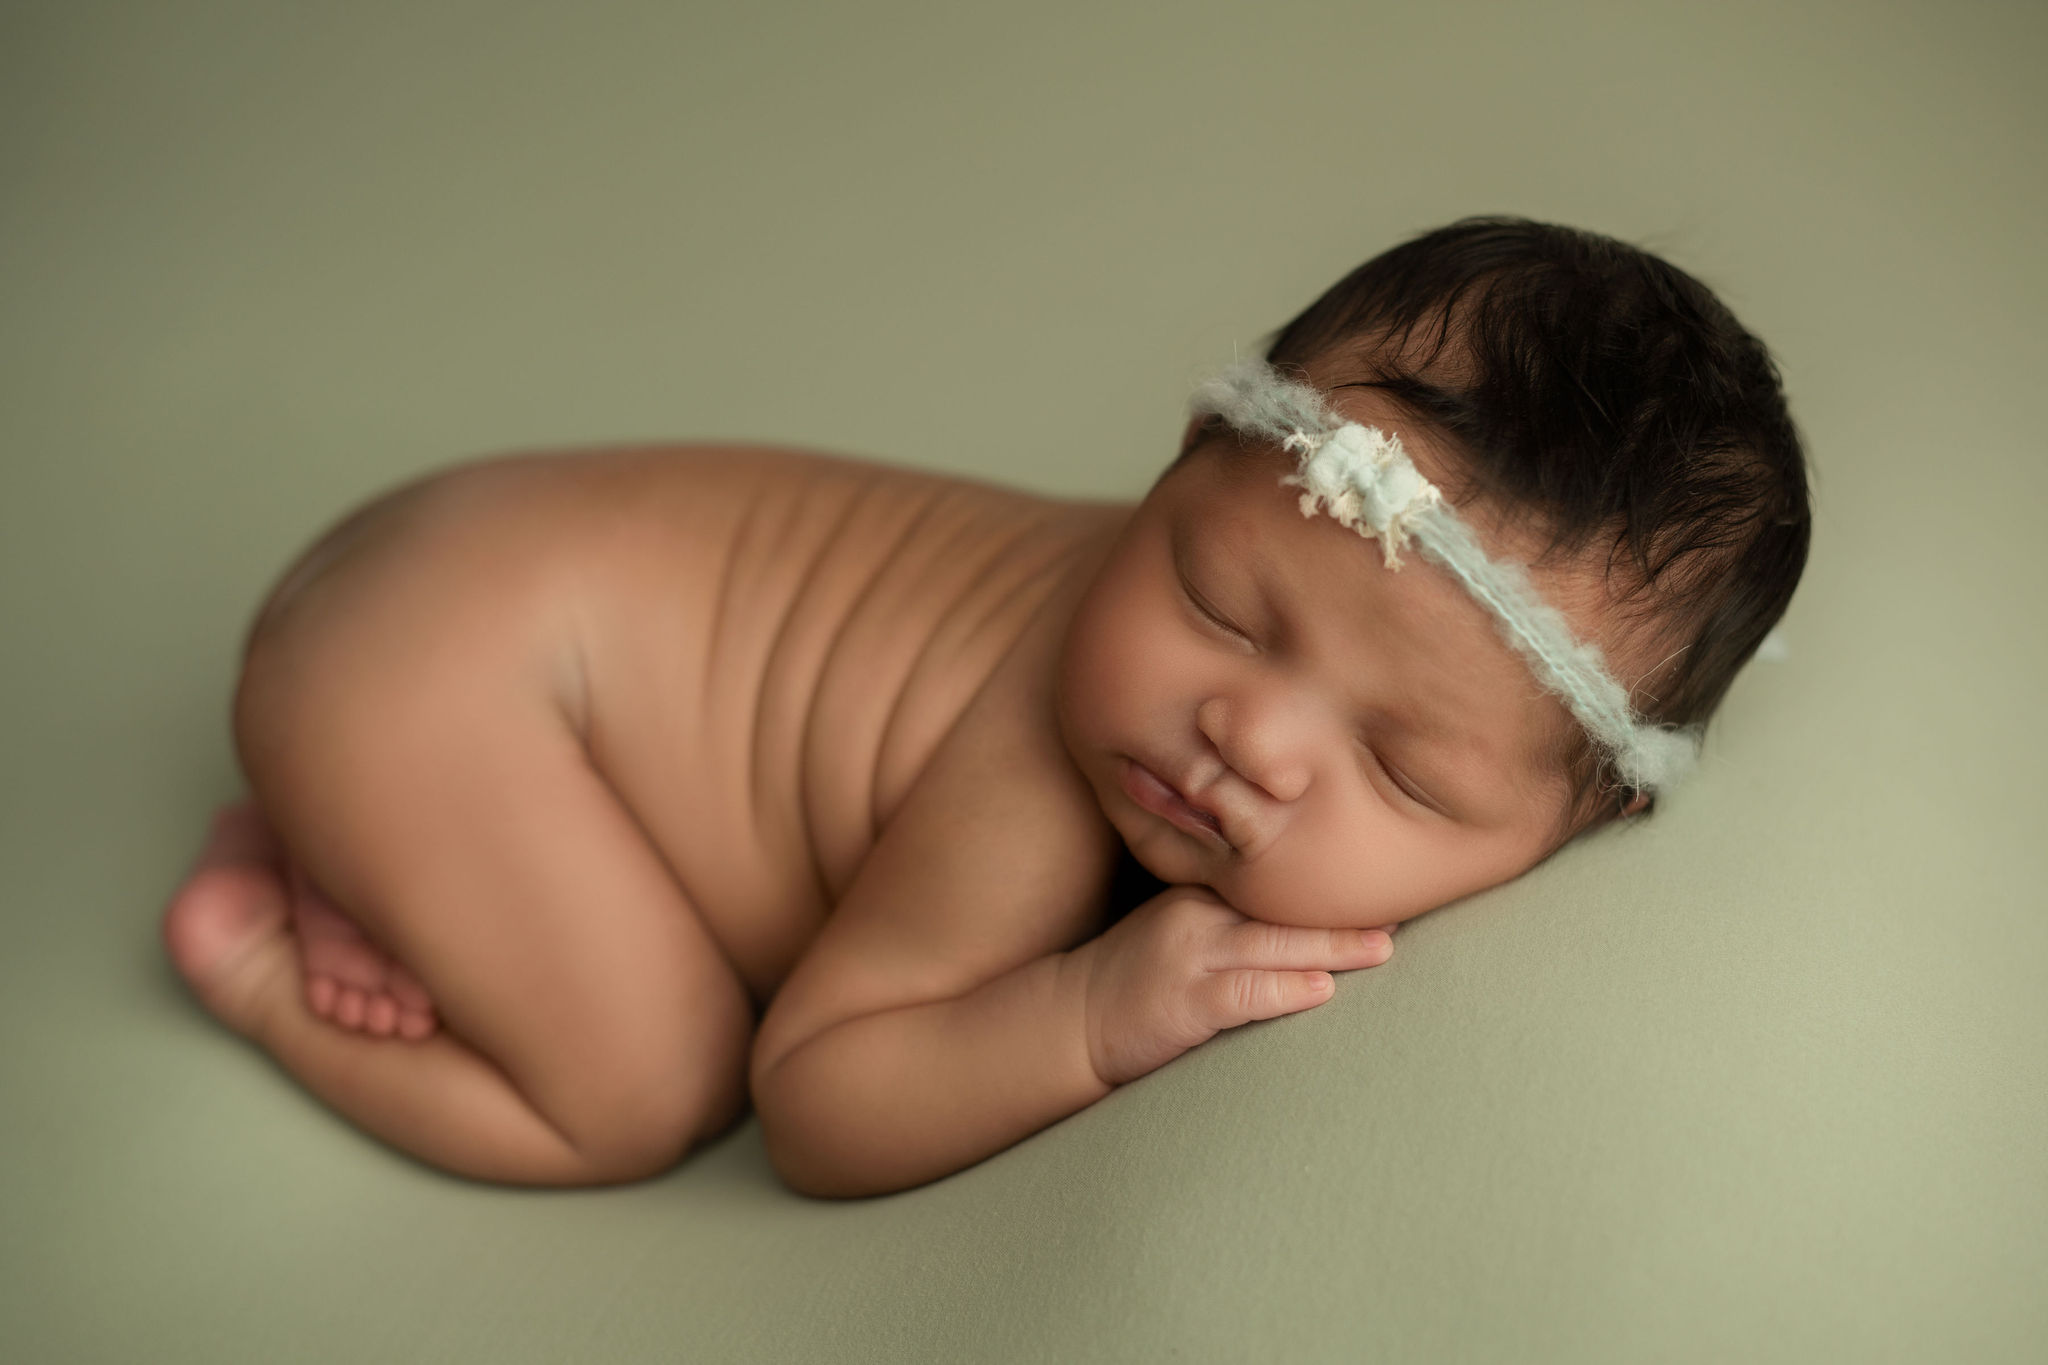 A newborn baby sleeps in the froggy pose wearing a green headband tampa baby boutique